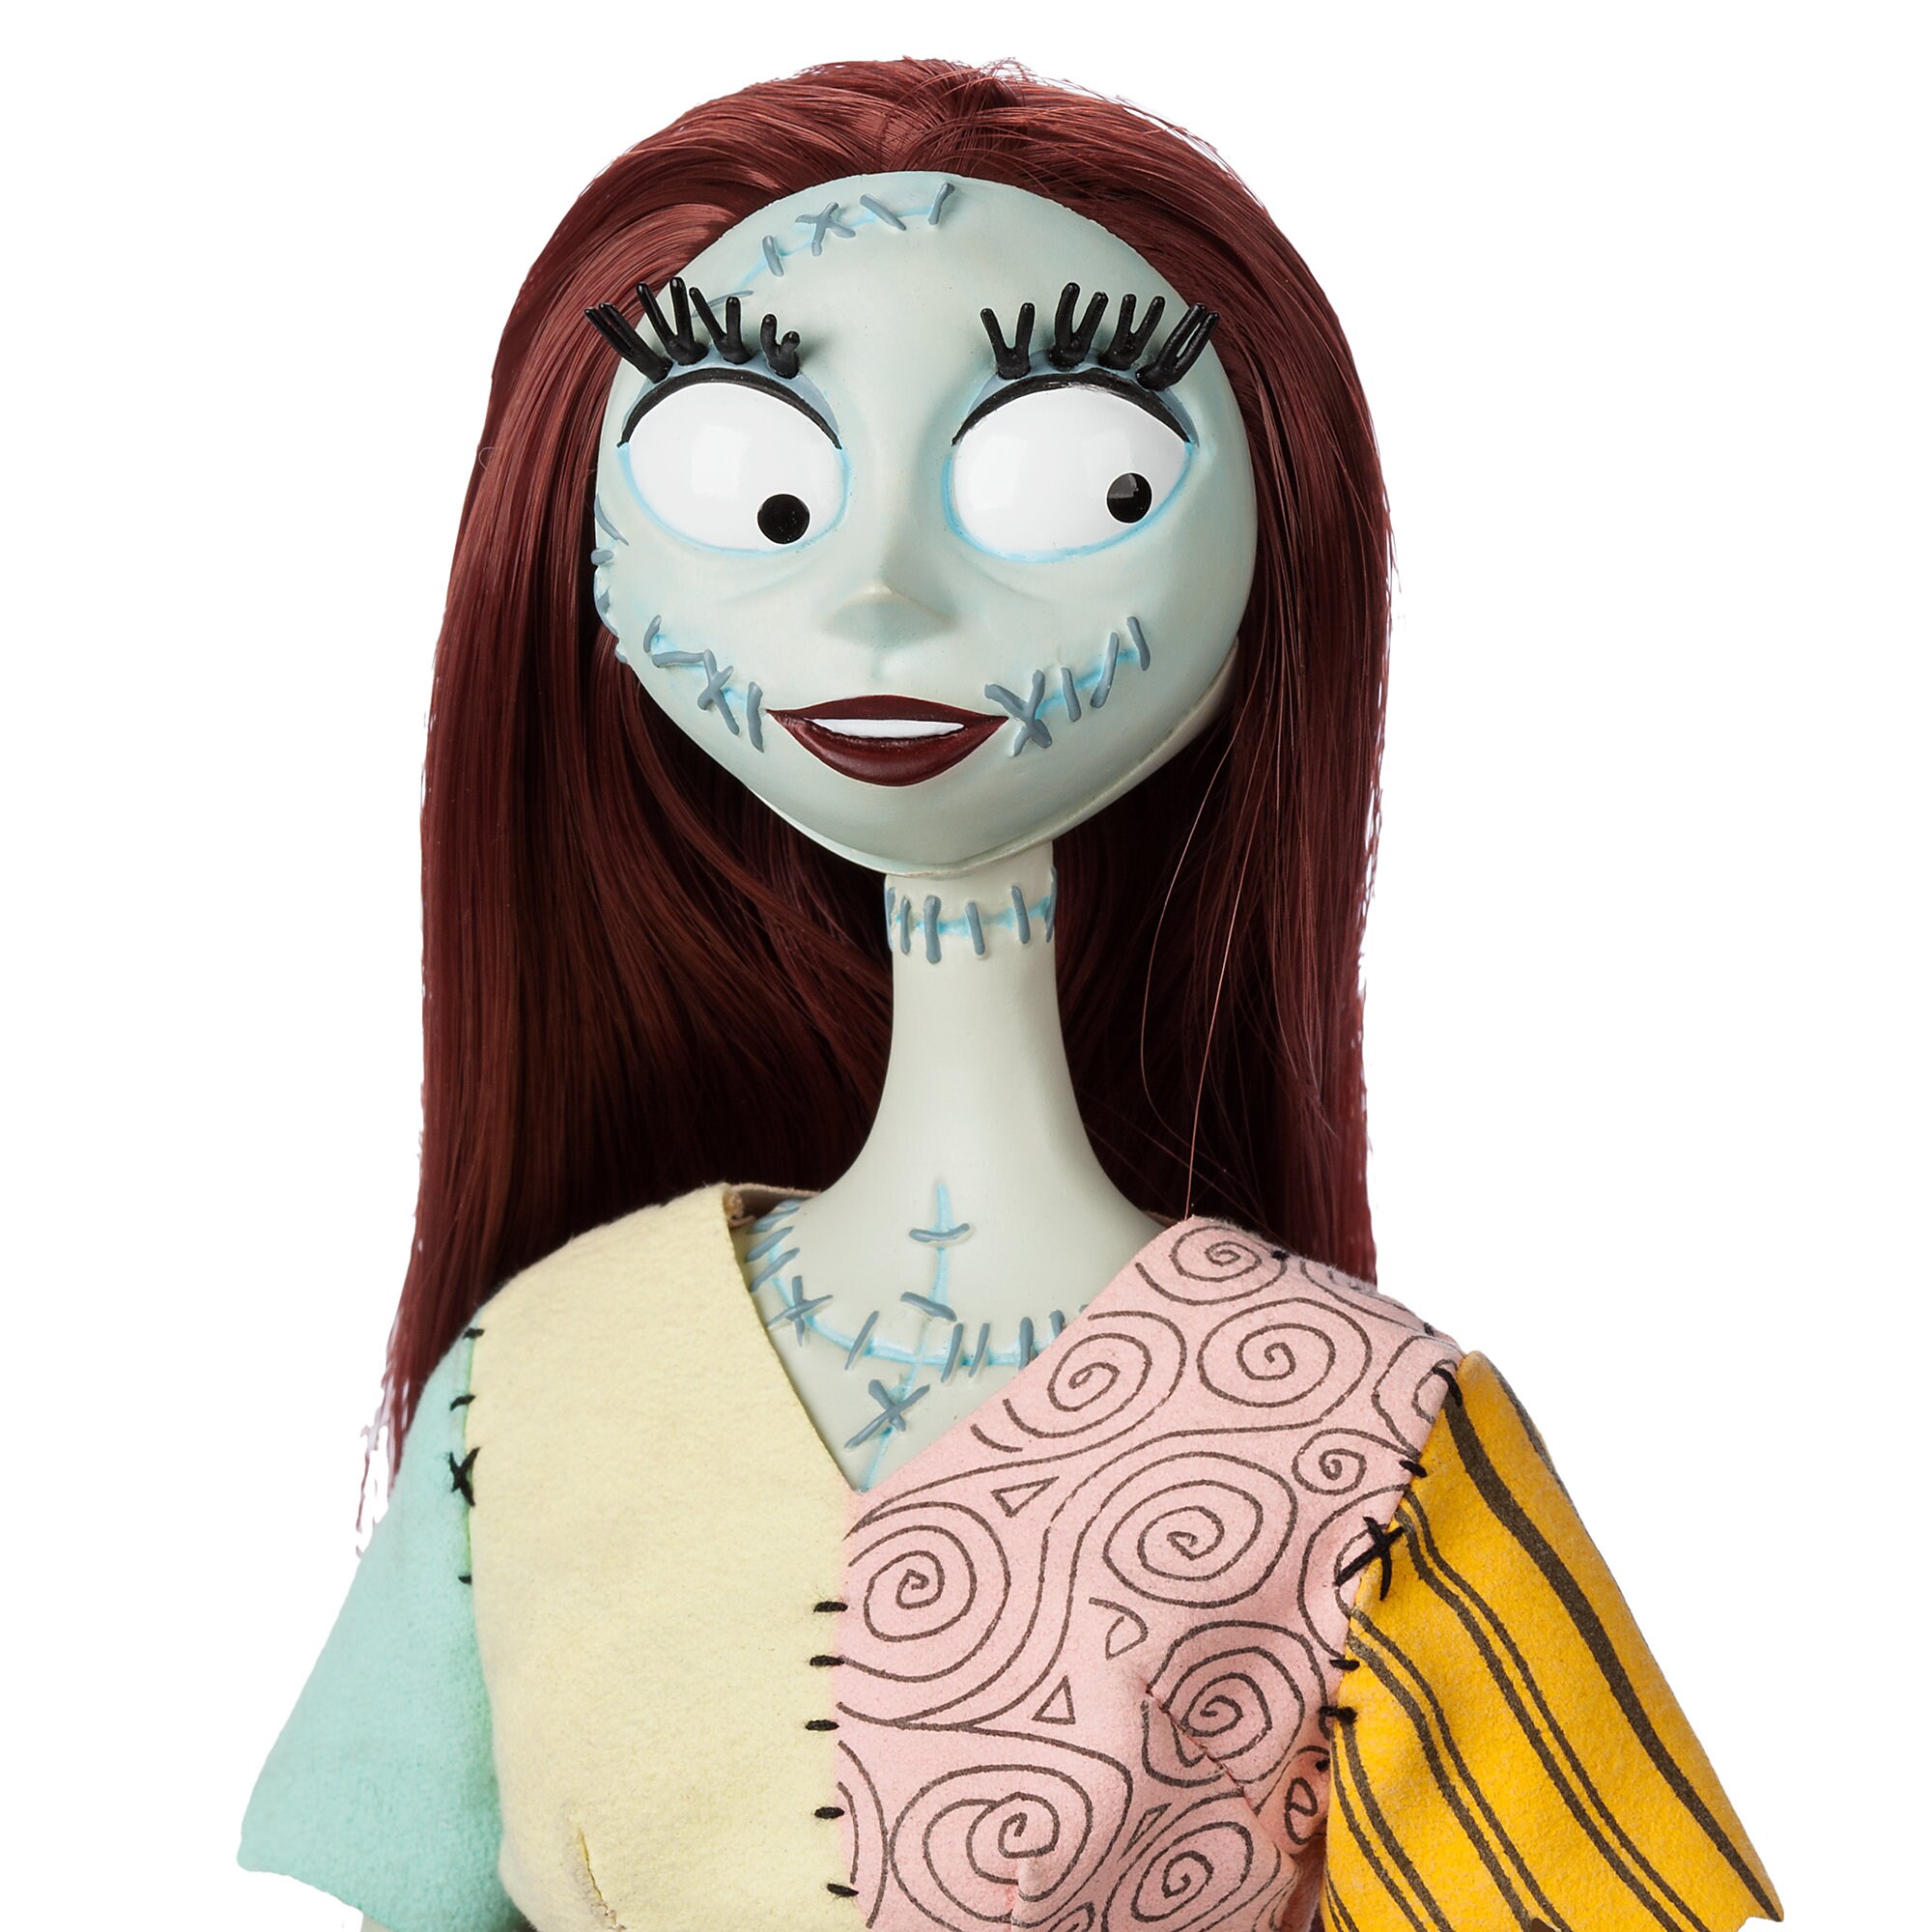 Sally 25th Anniversary Limited Edition Doll - The Nightmare Before Christmas